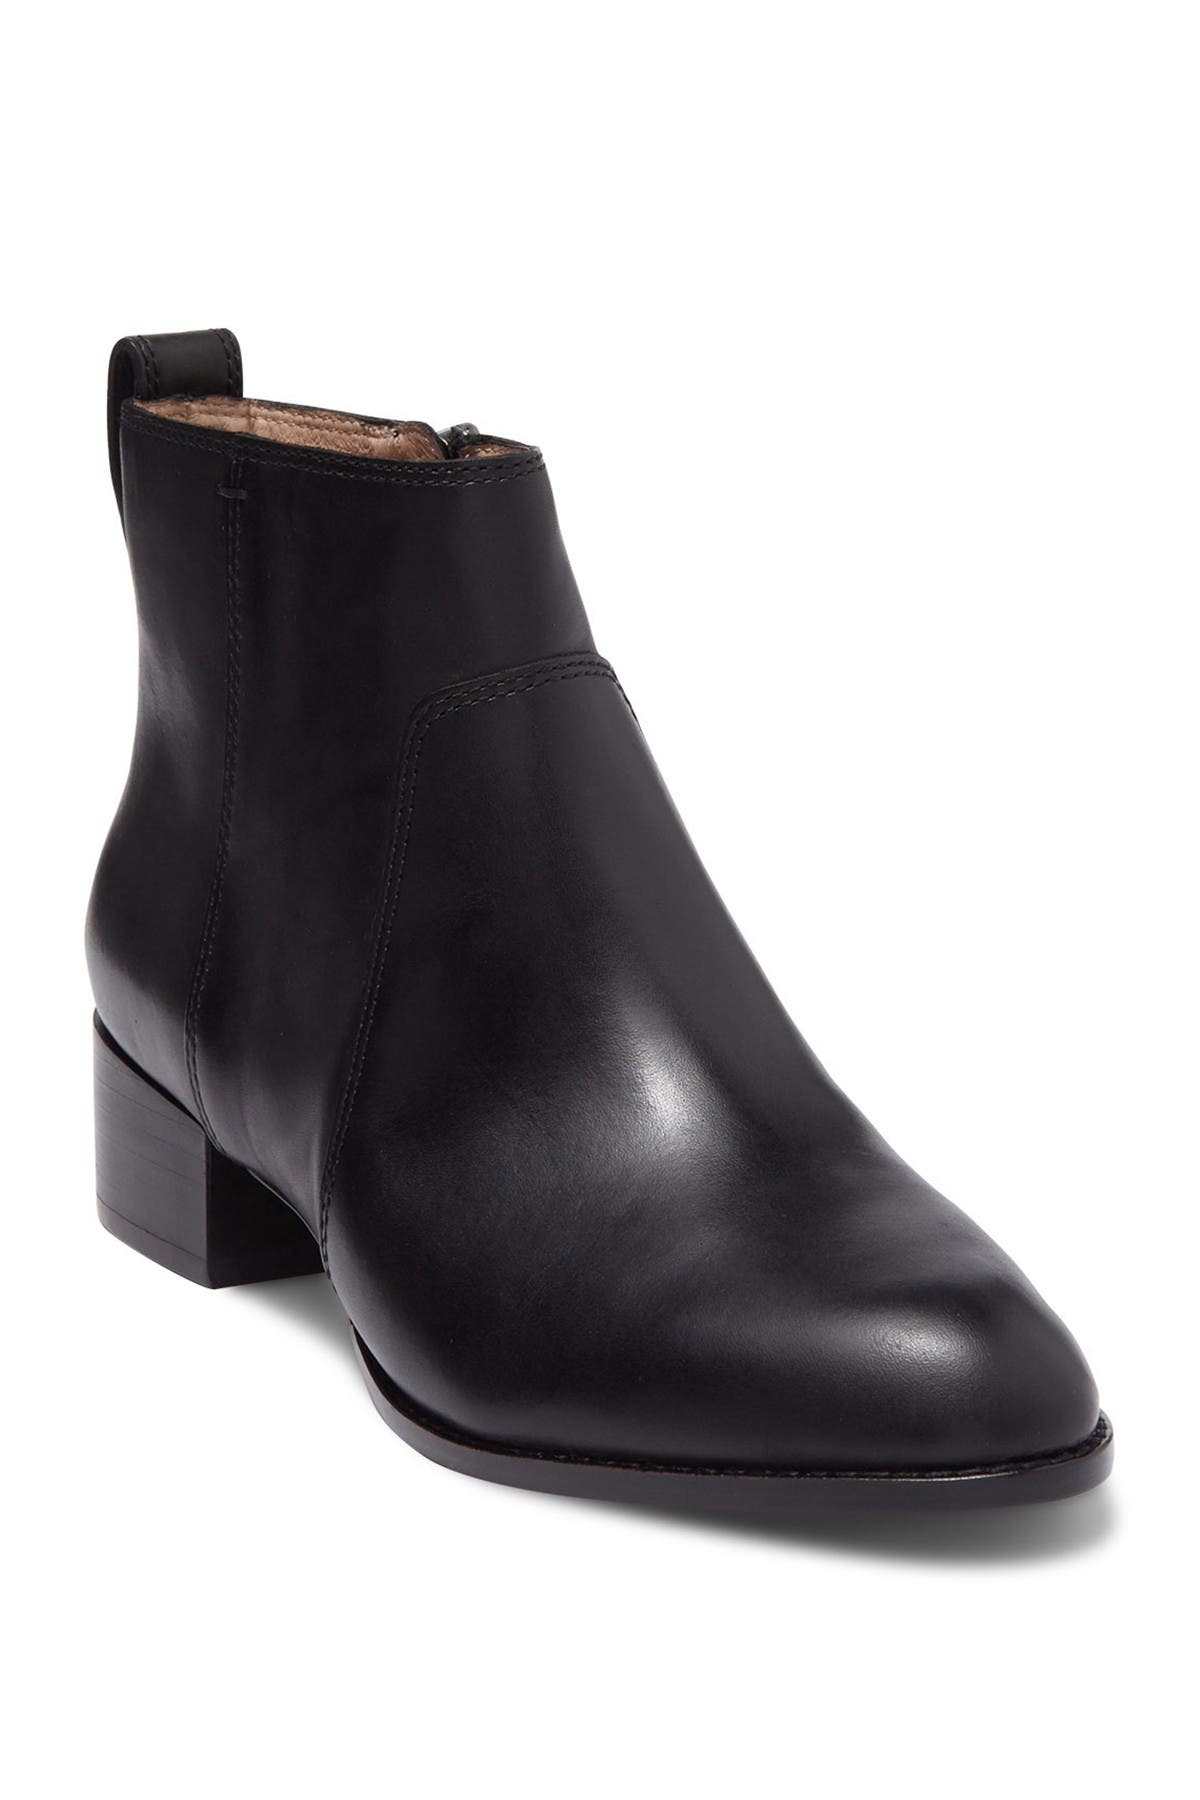 Madewell | Camden Leather Ankle Bootie 